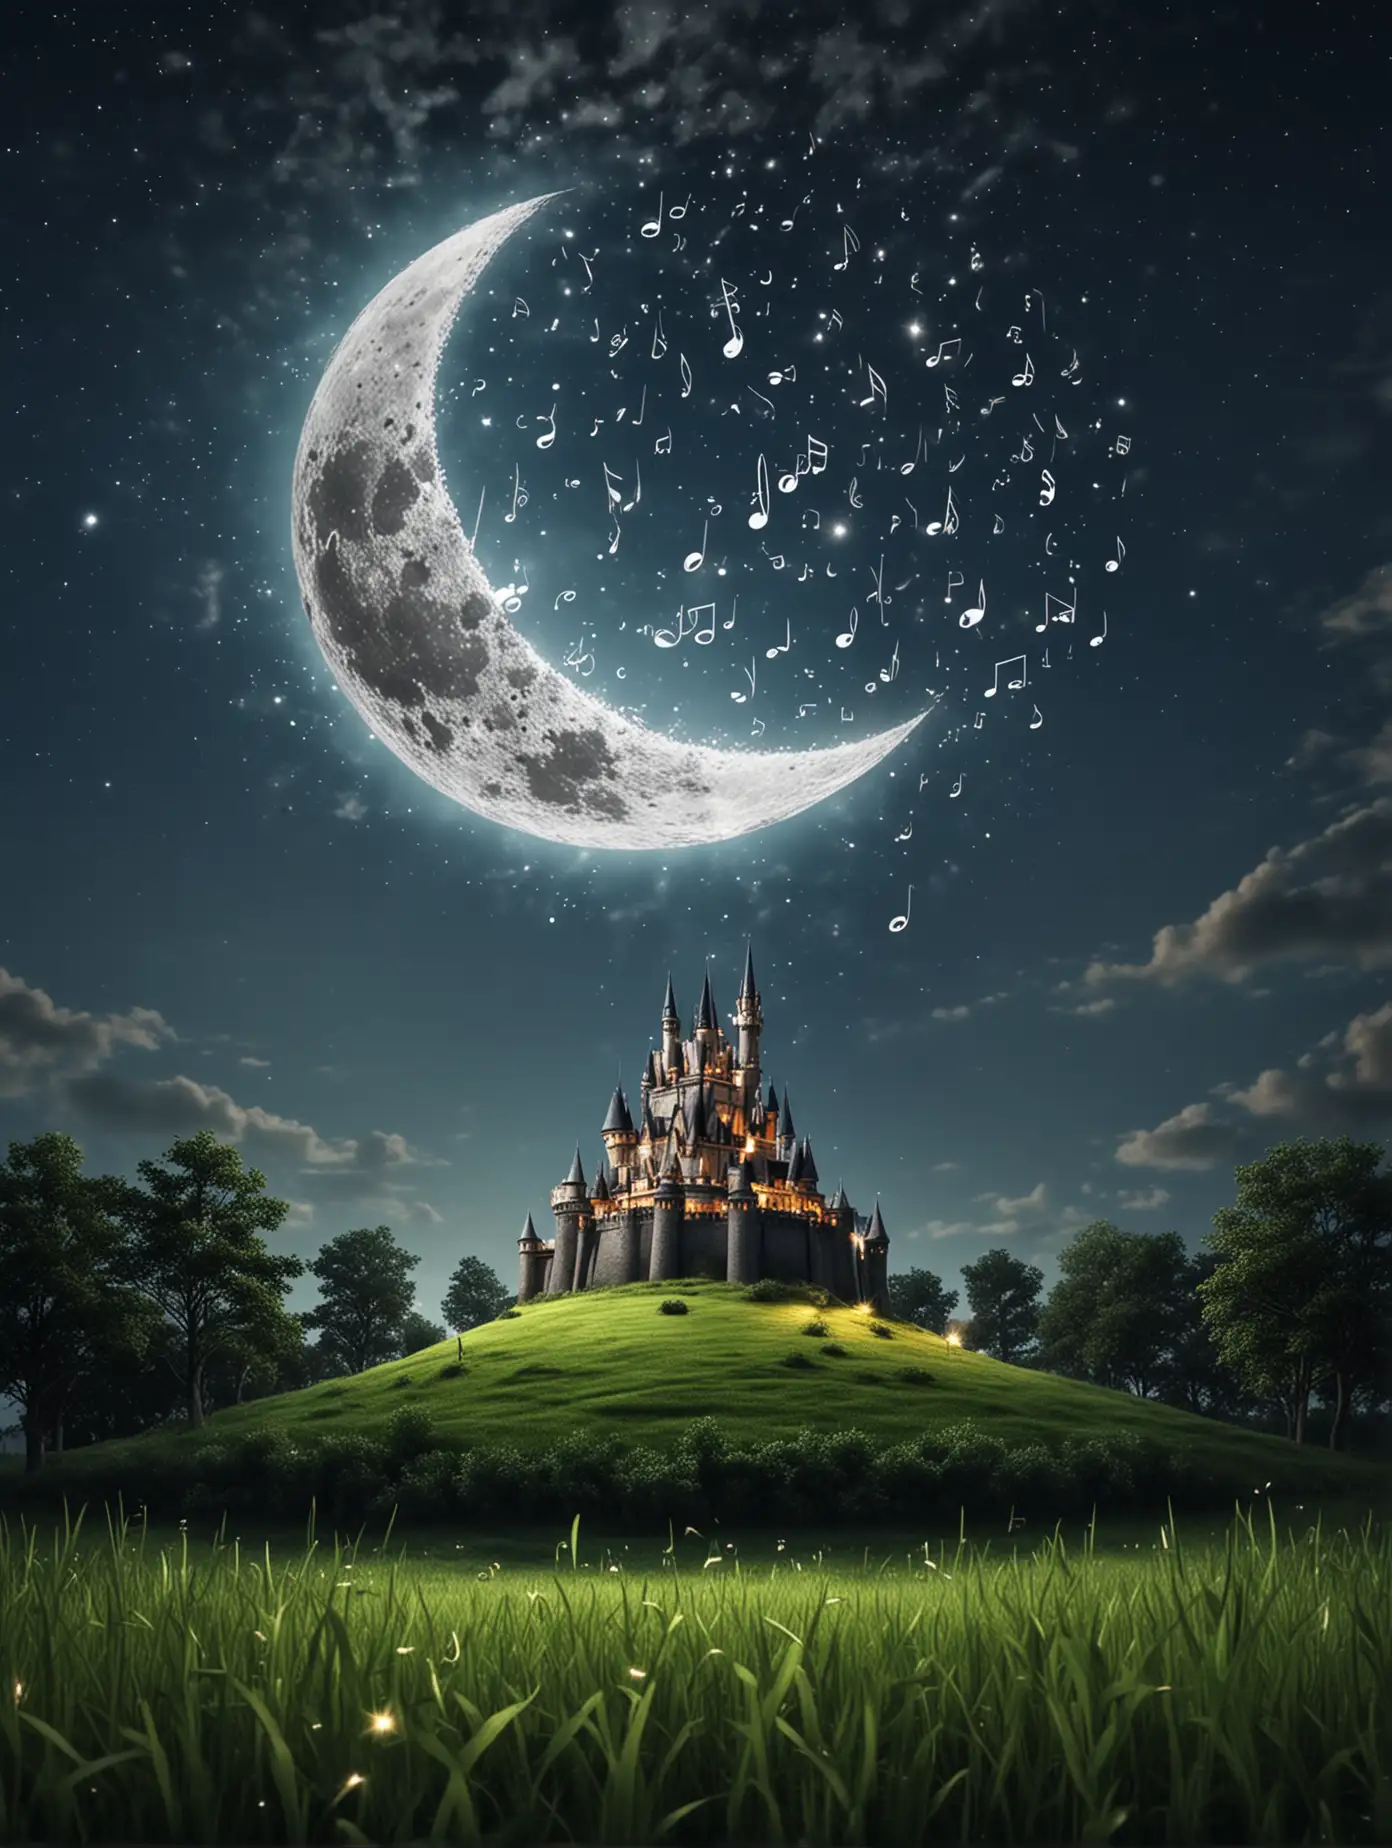 Moonlit Castle with Floating Notes in Clear Sky Background